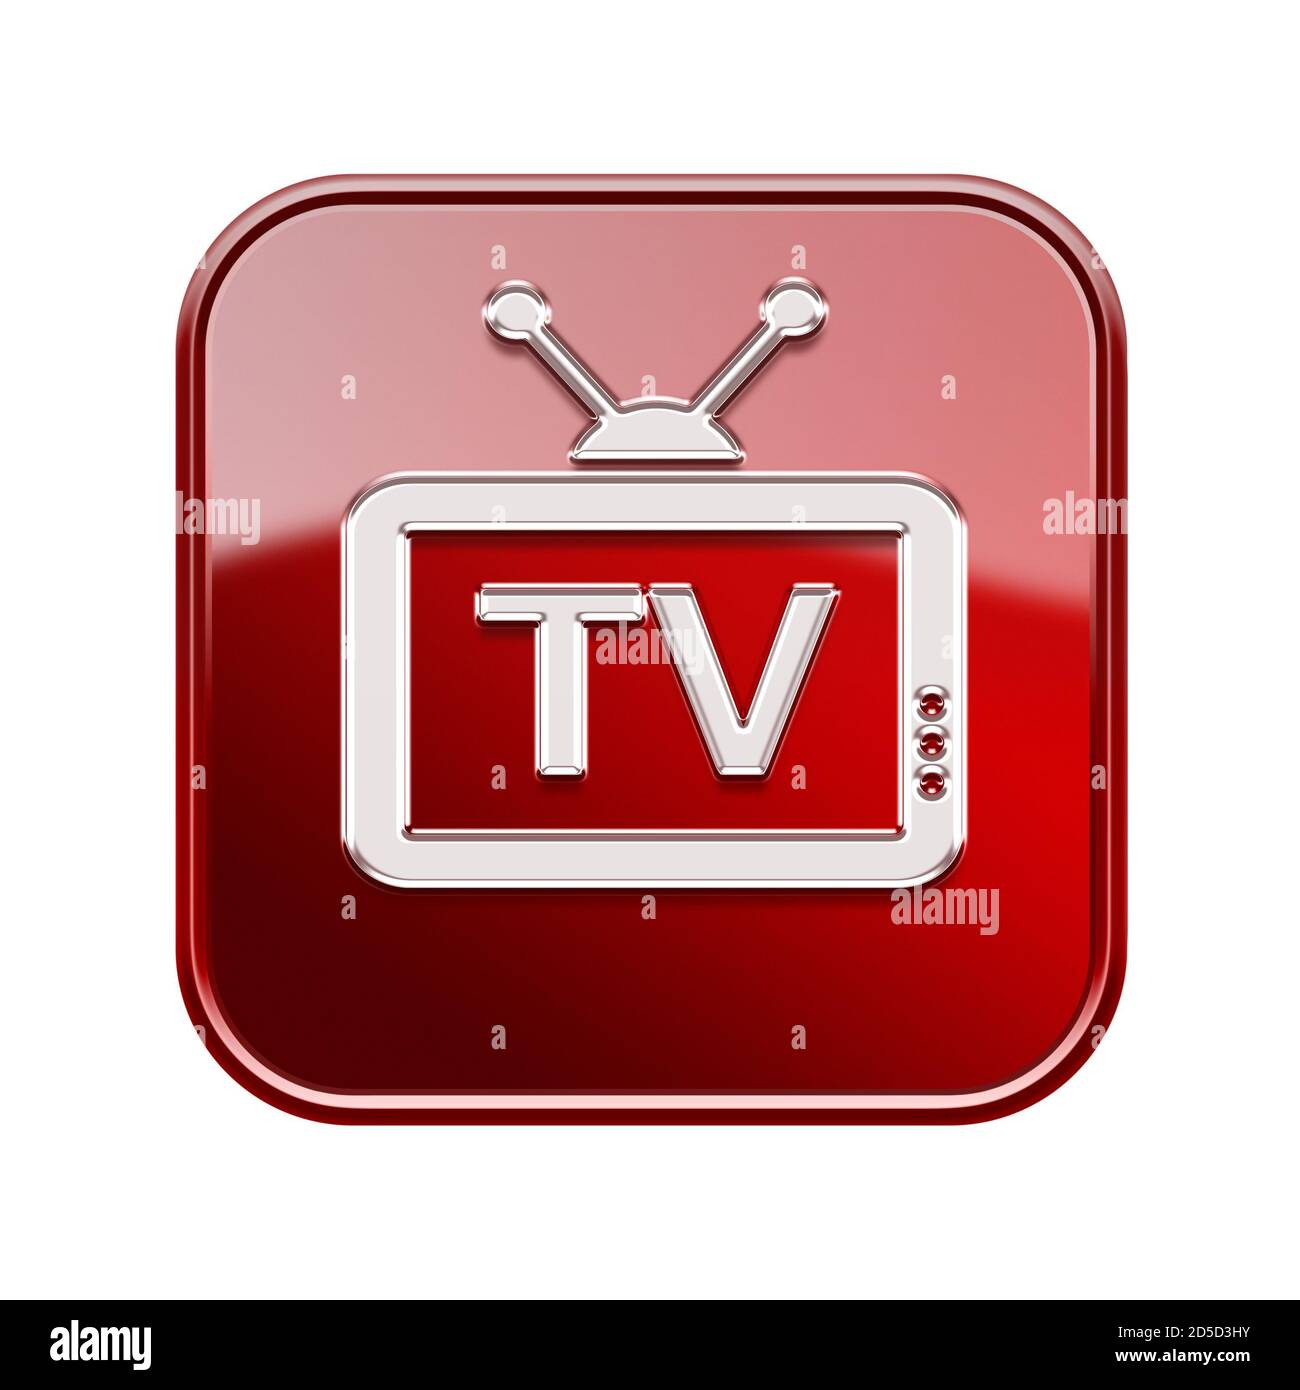 TV icon glossy red, isolated on white background Stock Photo